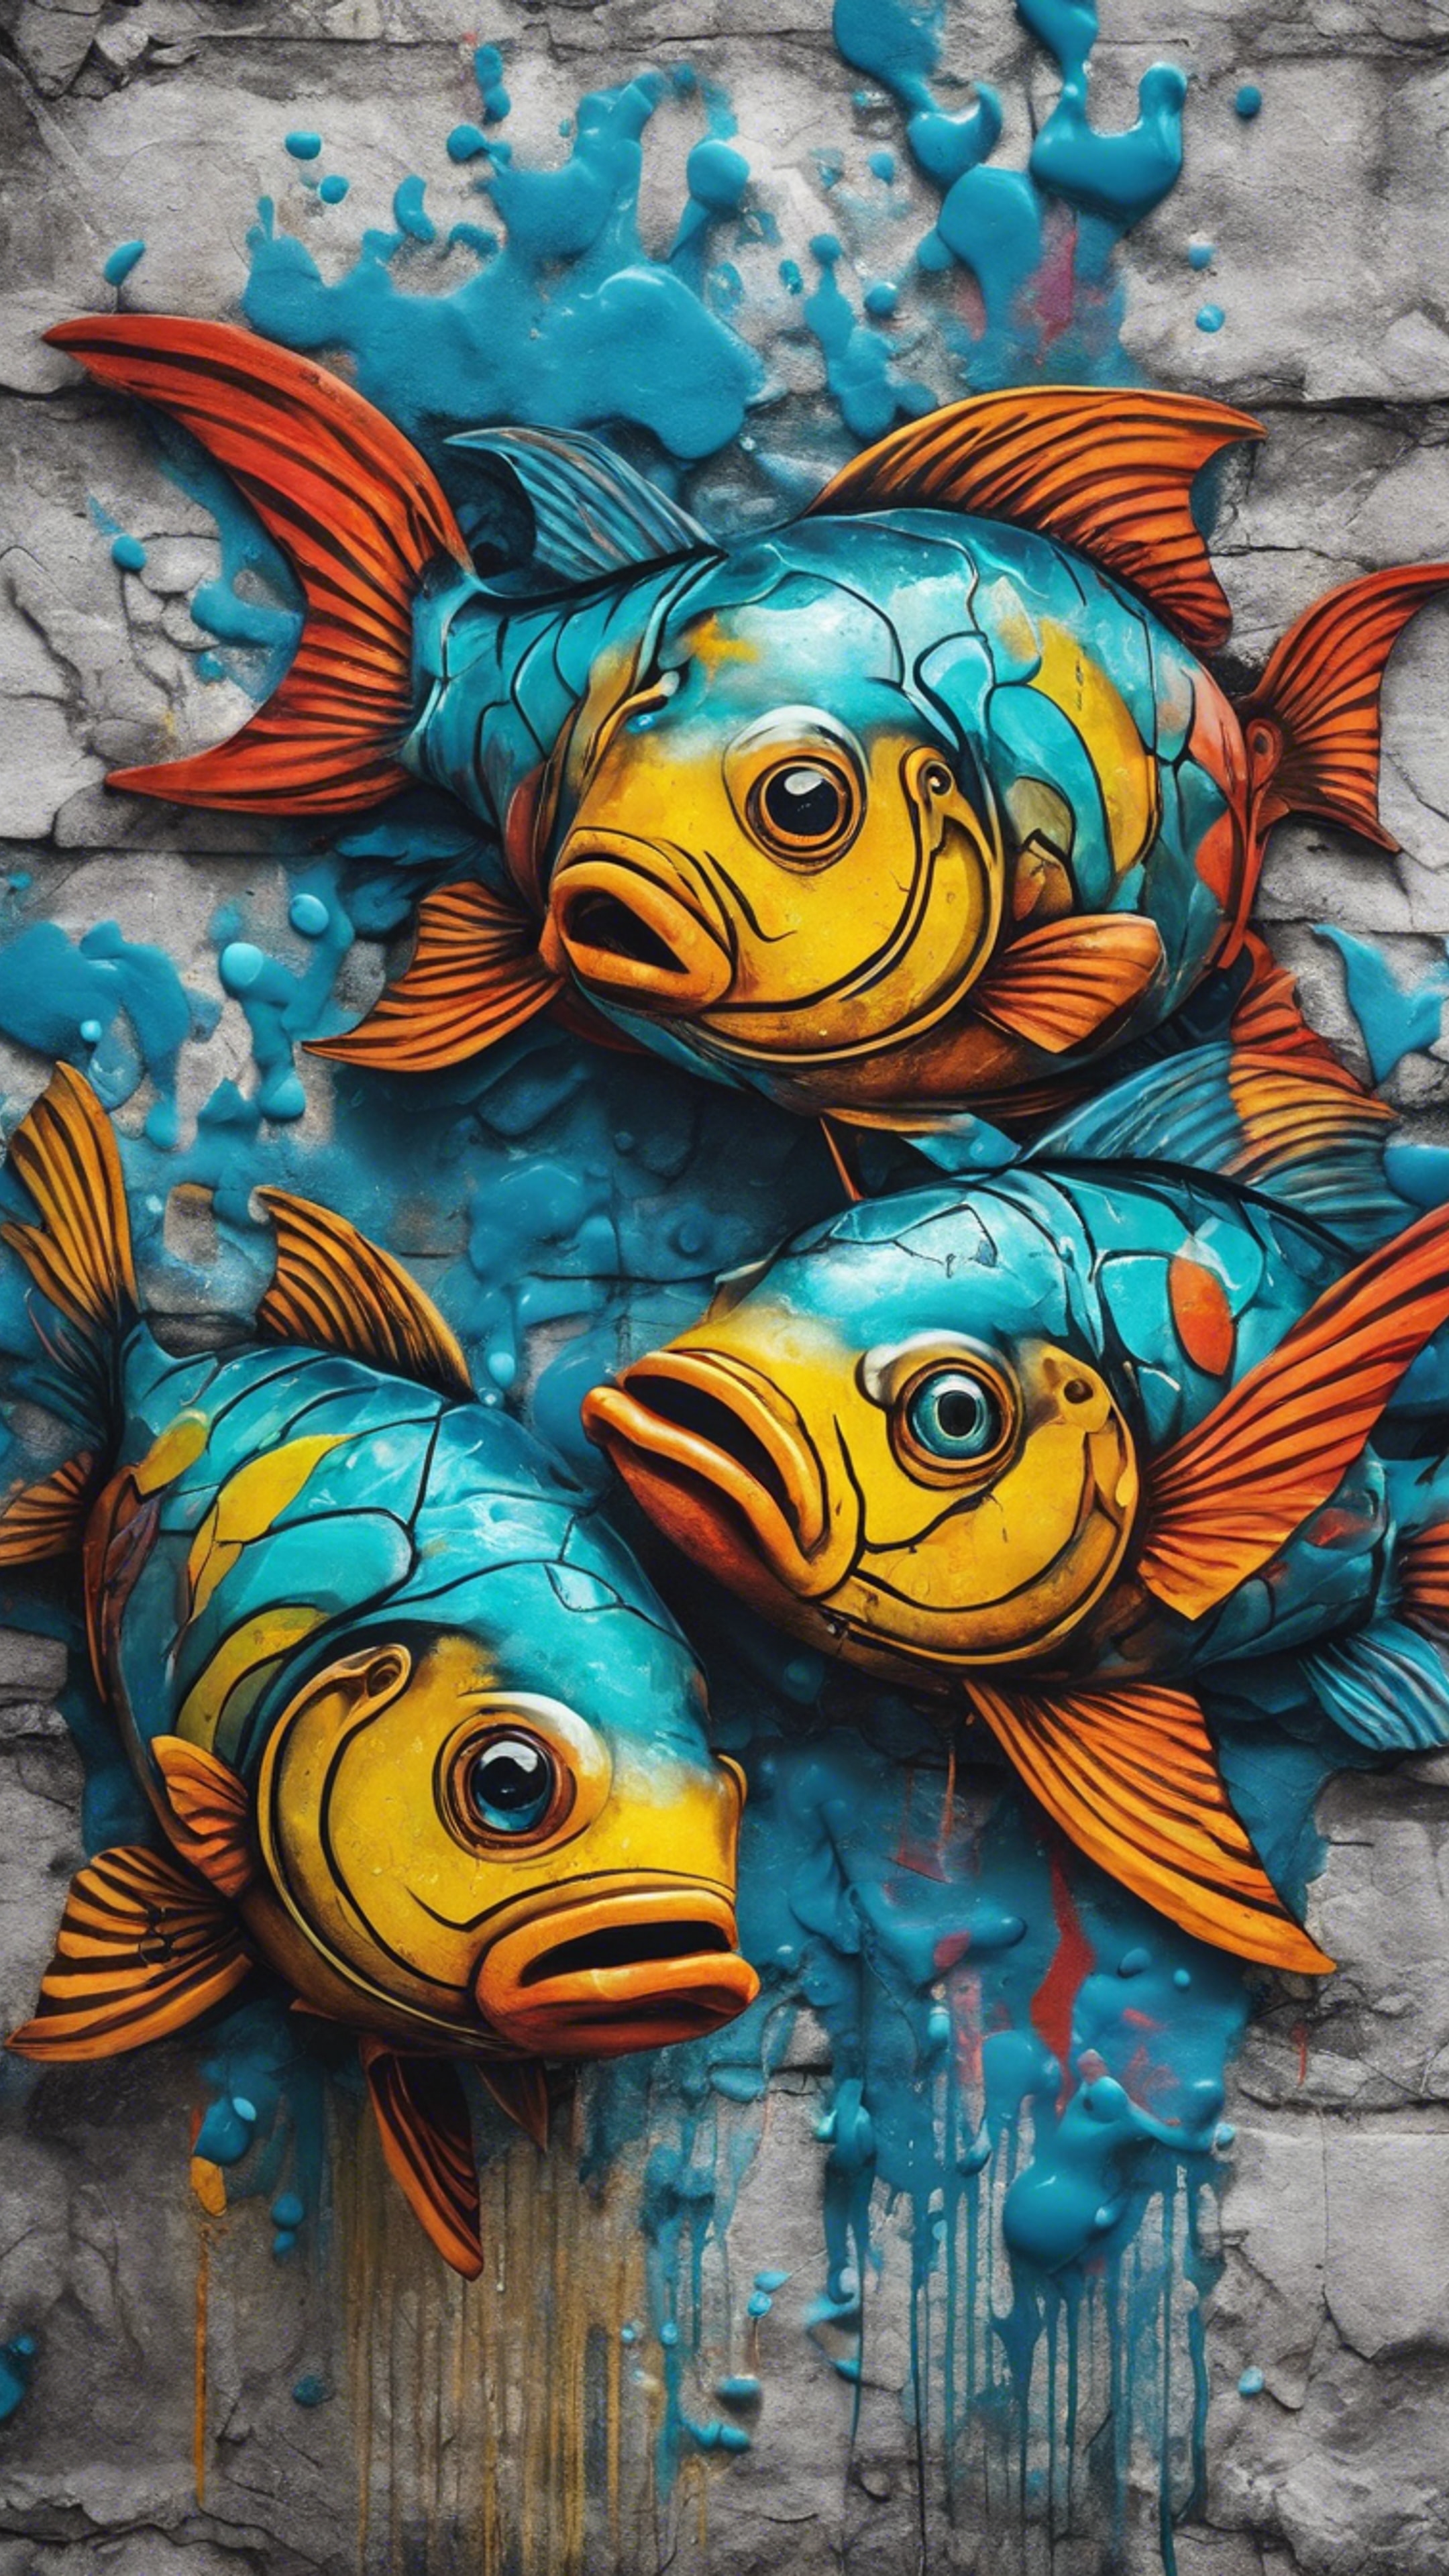 A vibrant street art depicting Pisces as two playful fish, on a textured wall with dynamic splashes of color. Tapeta[a1e08805c6ad437f94cb]